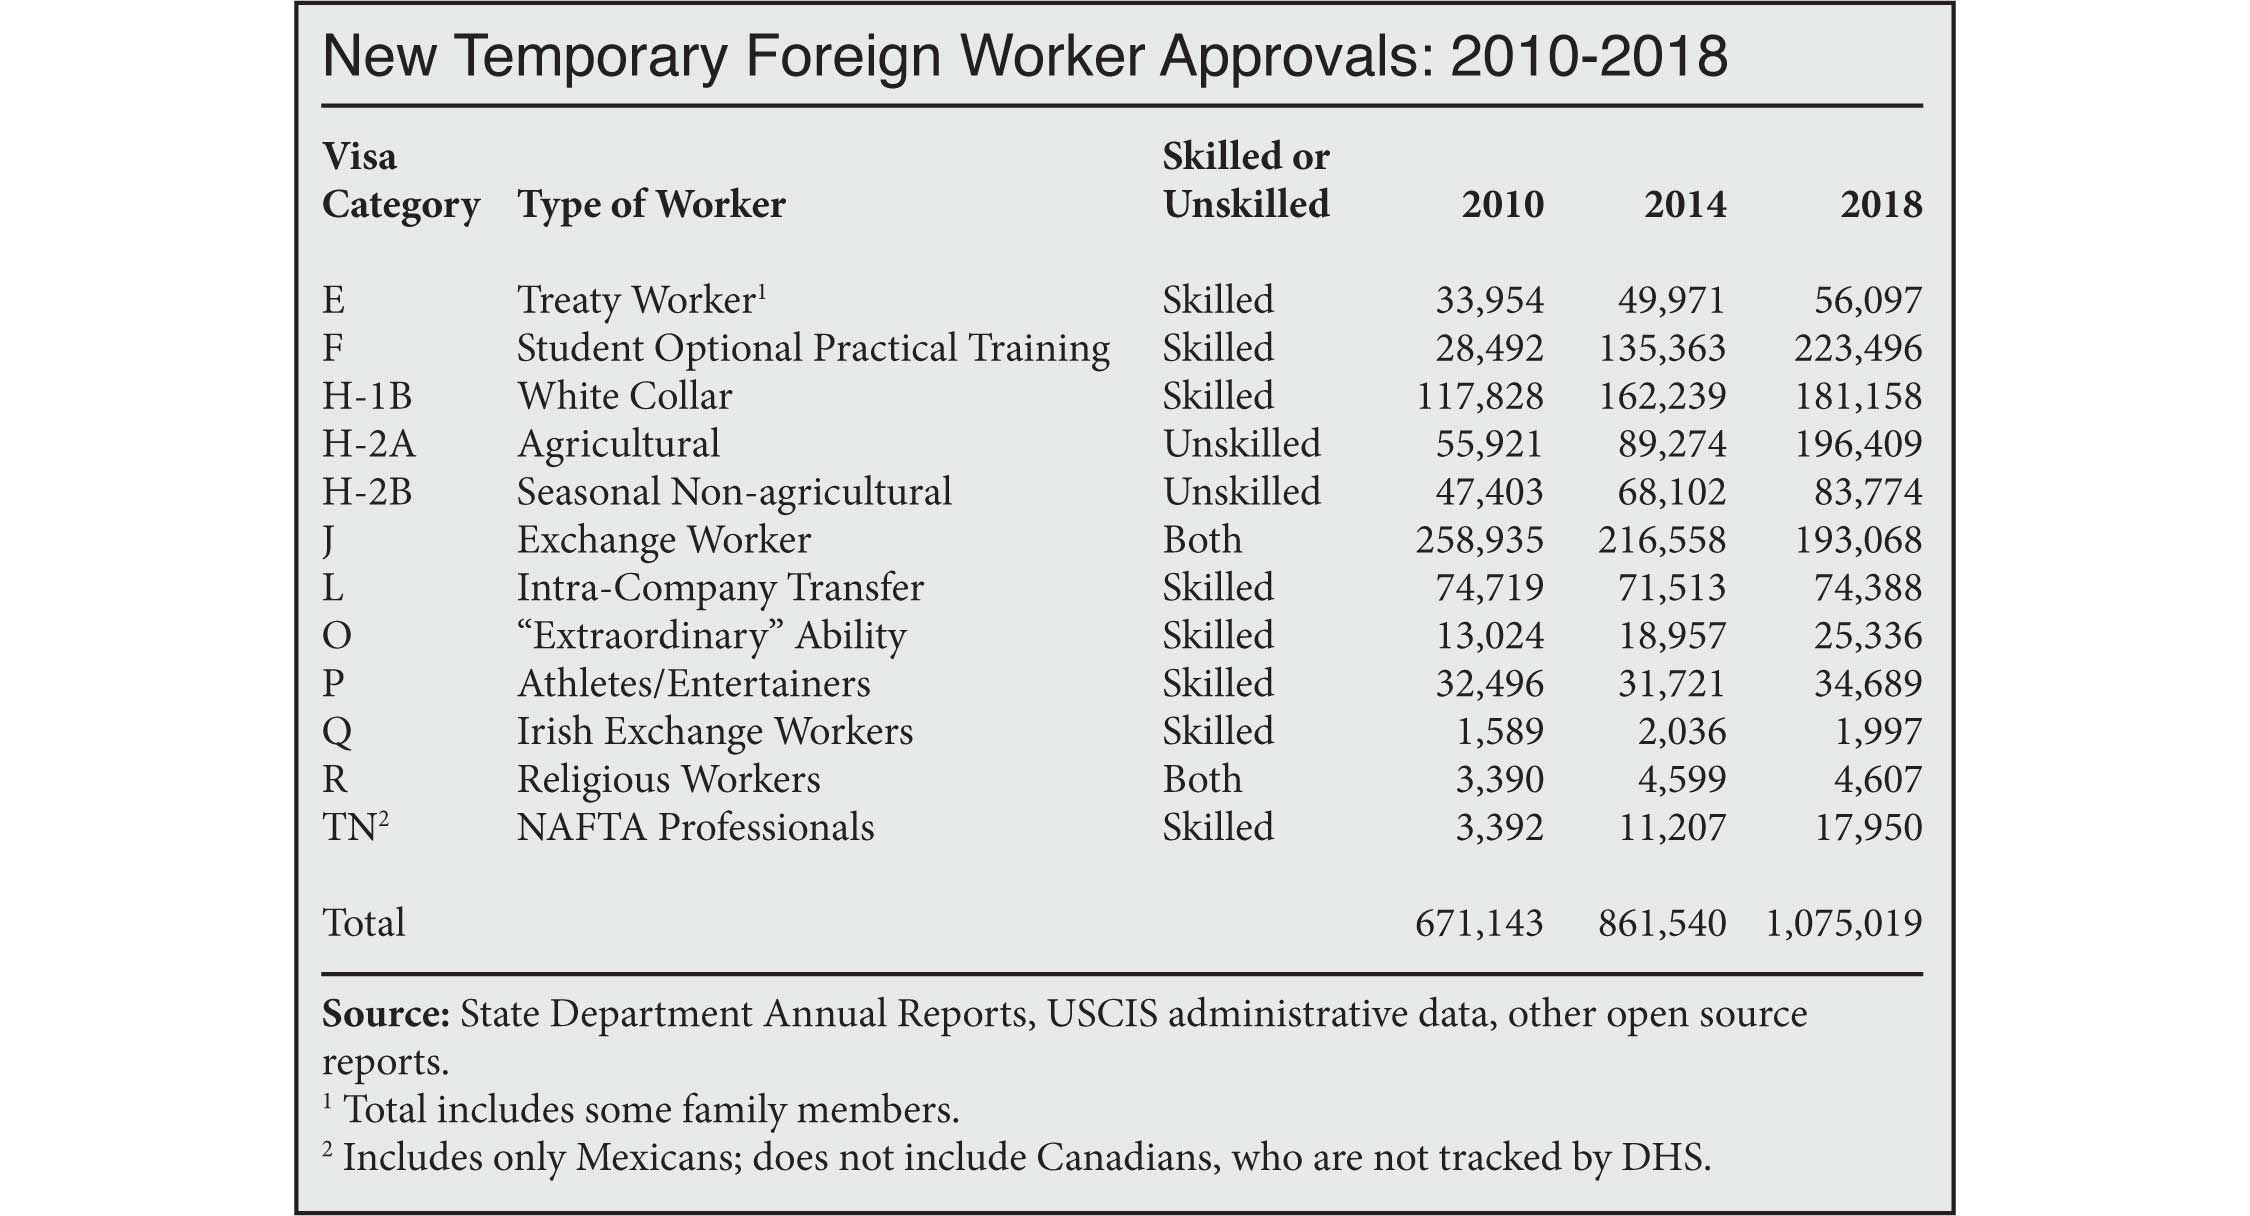 Table: New Temporary Worker Approvals, 2010 to 2018